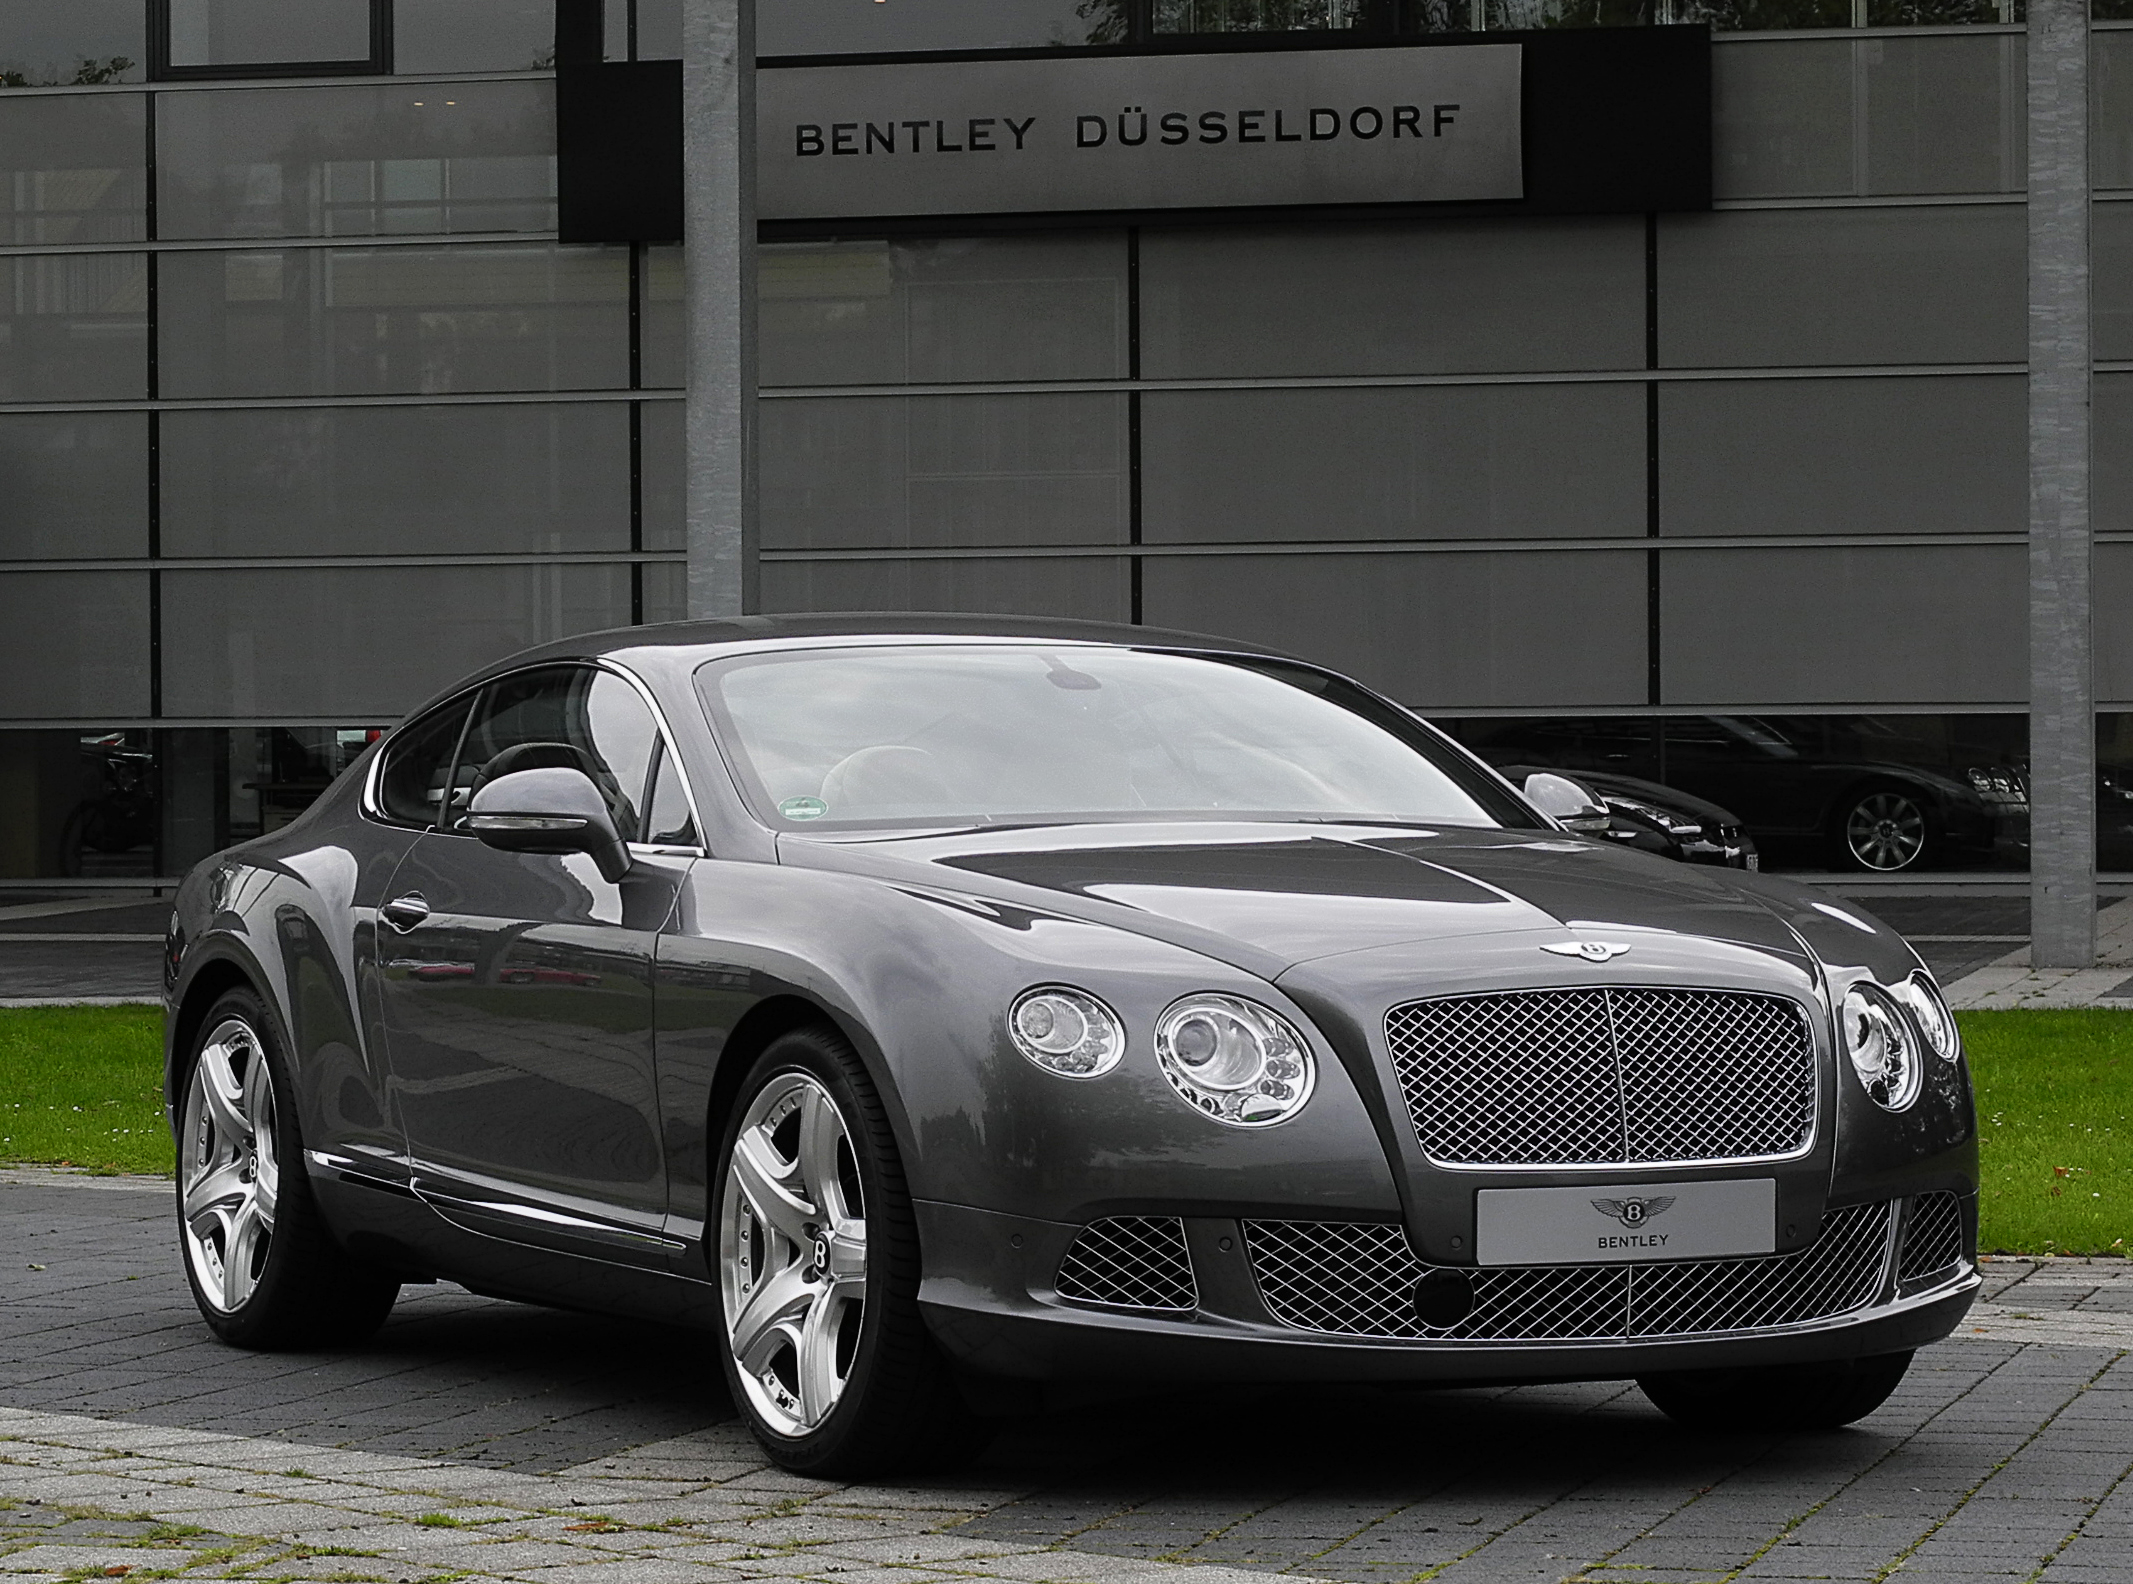 Bentley Continental GT  Backgrounds, Compatible - PC, Mobile, Gadgets| 2133x1584 px